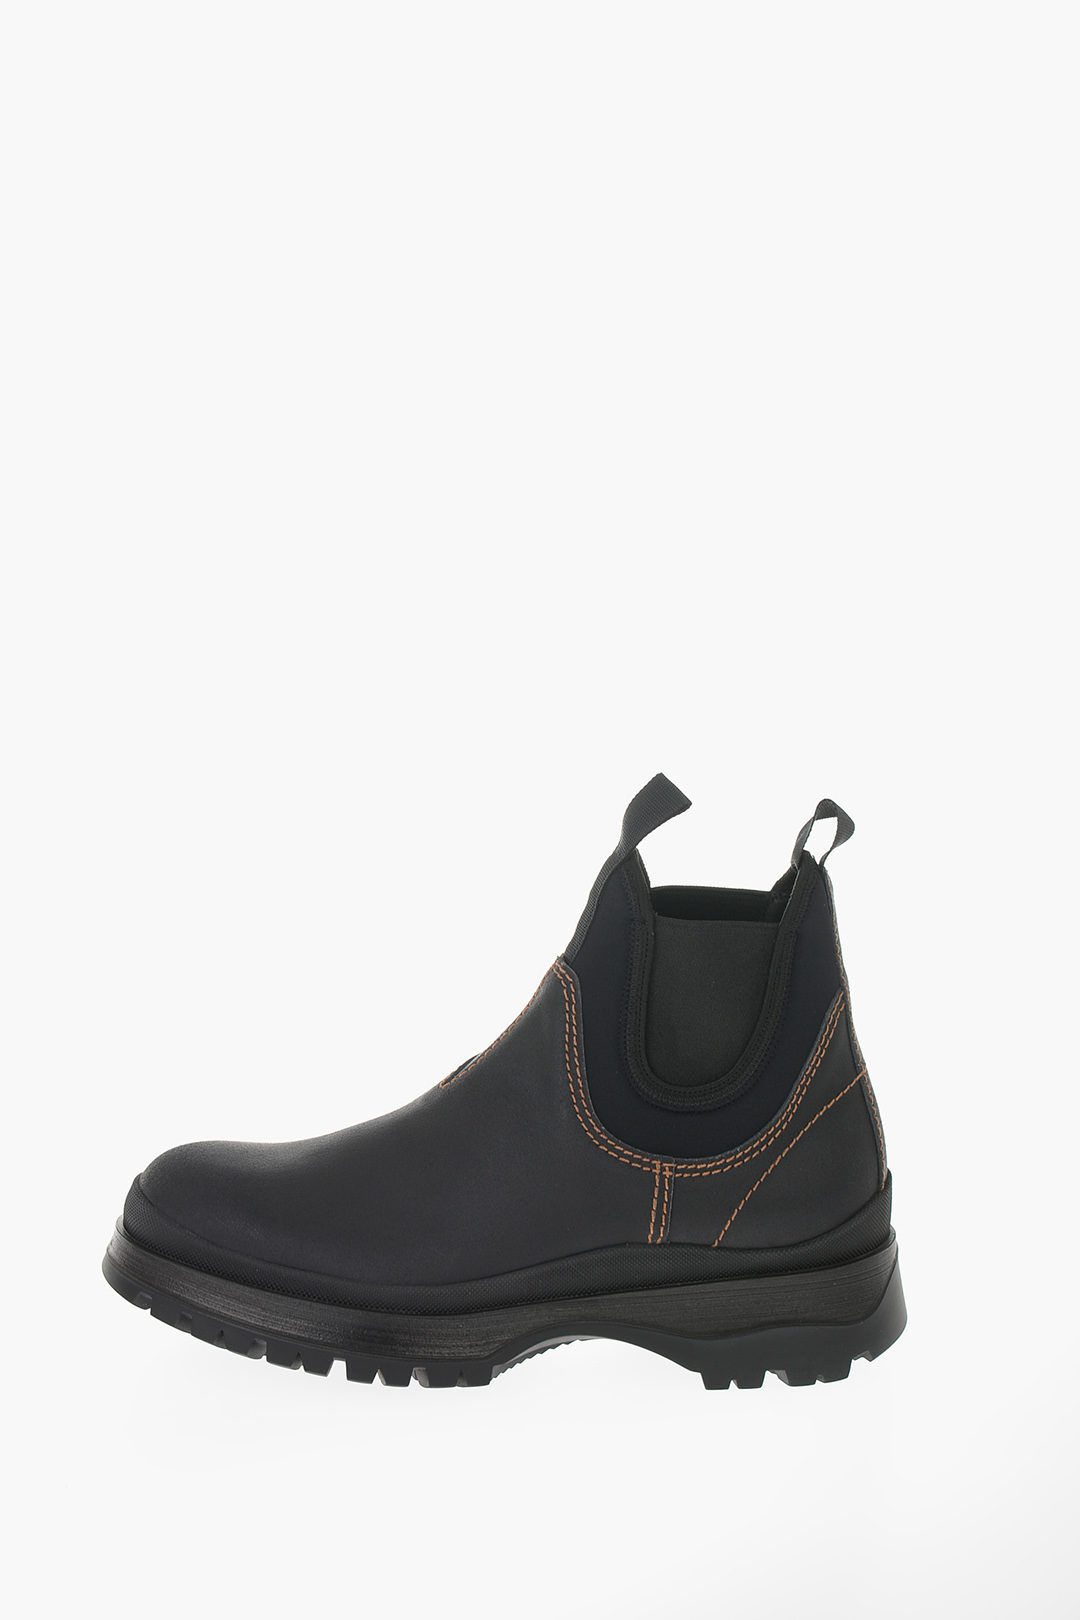 Prada Track Sole Leather Chelsea Boots men - Glamood Outlet